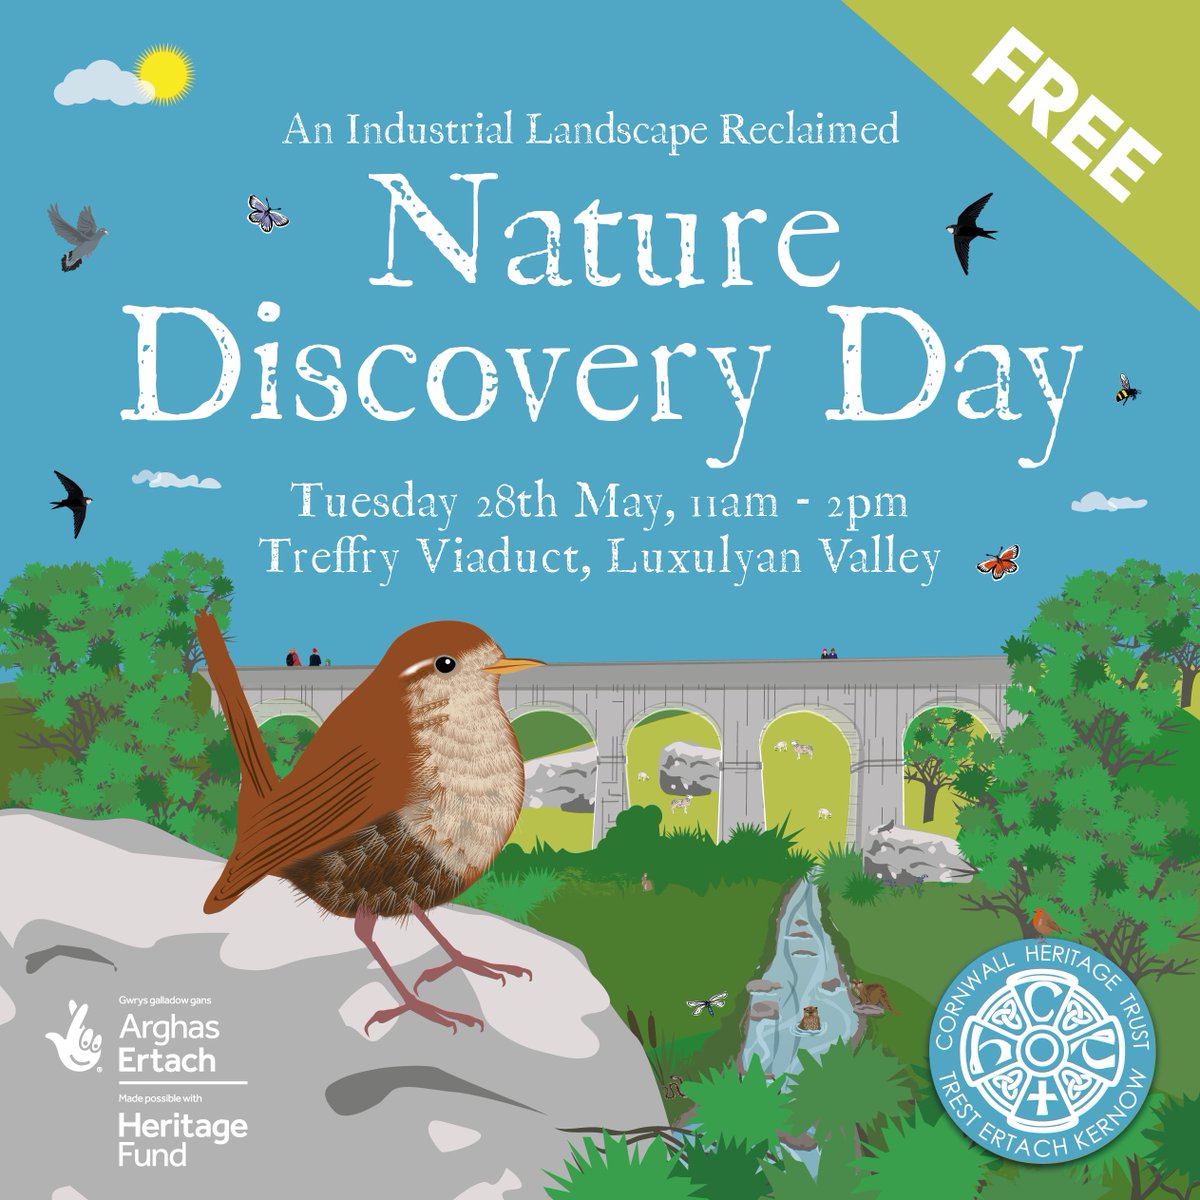 We’re hosting a special Nature Discovery Day at Treffry Viaduct on Tuesday 28th May from 11am – 2pm, and invite you all to join us! This event has been made possible by funding from @HeritageFundUK. Find out more here cornwallheritagetrust.org/free-nature-di…